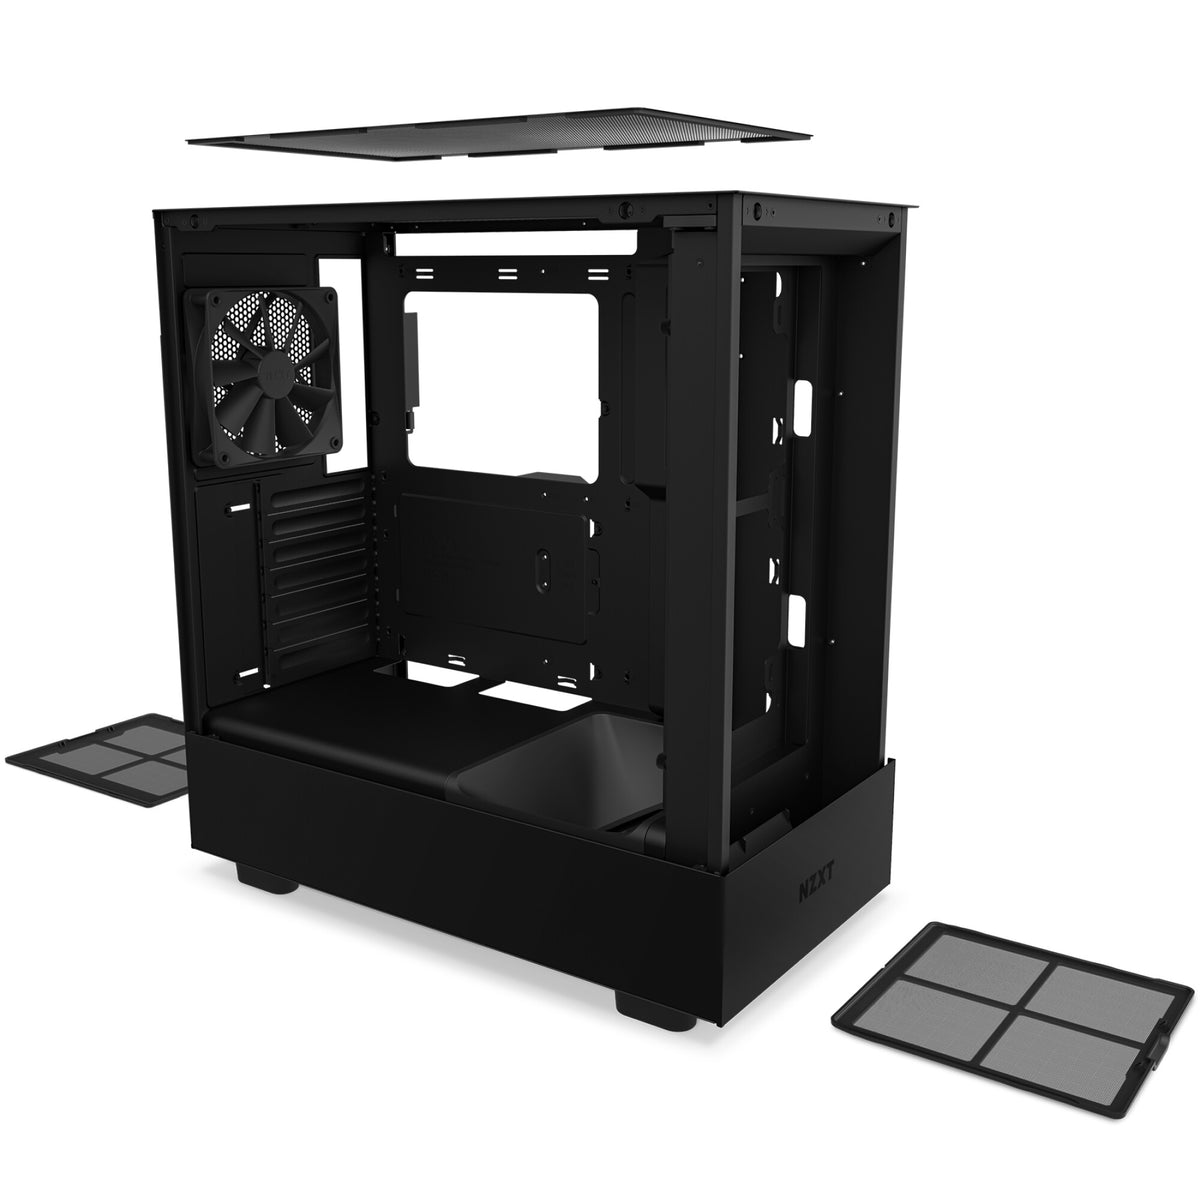 NZXT H5 Flow - ATX Mid Tower Case in Black